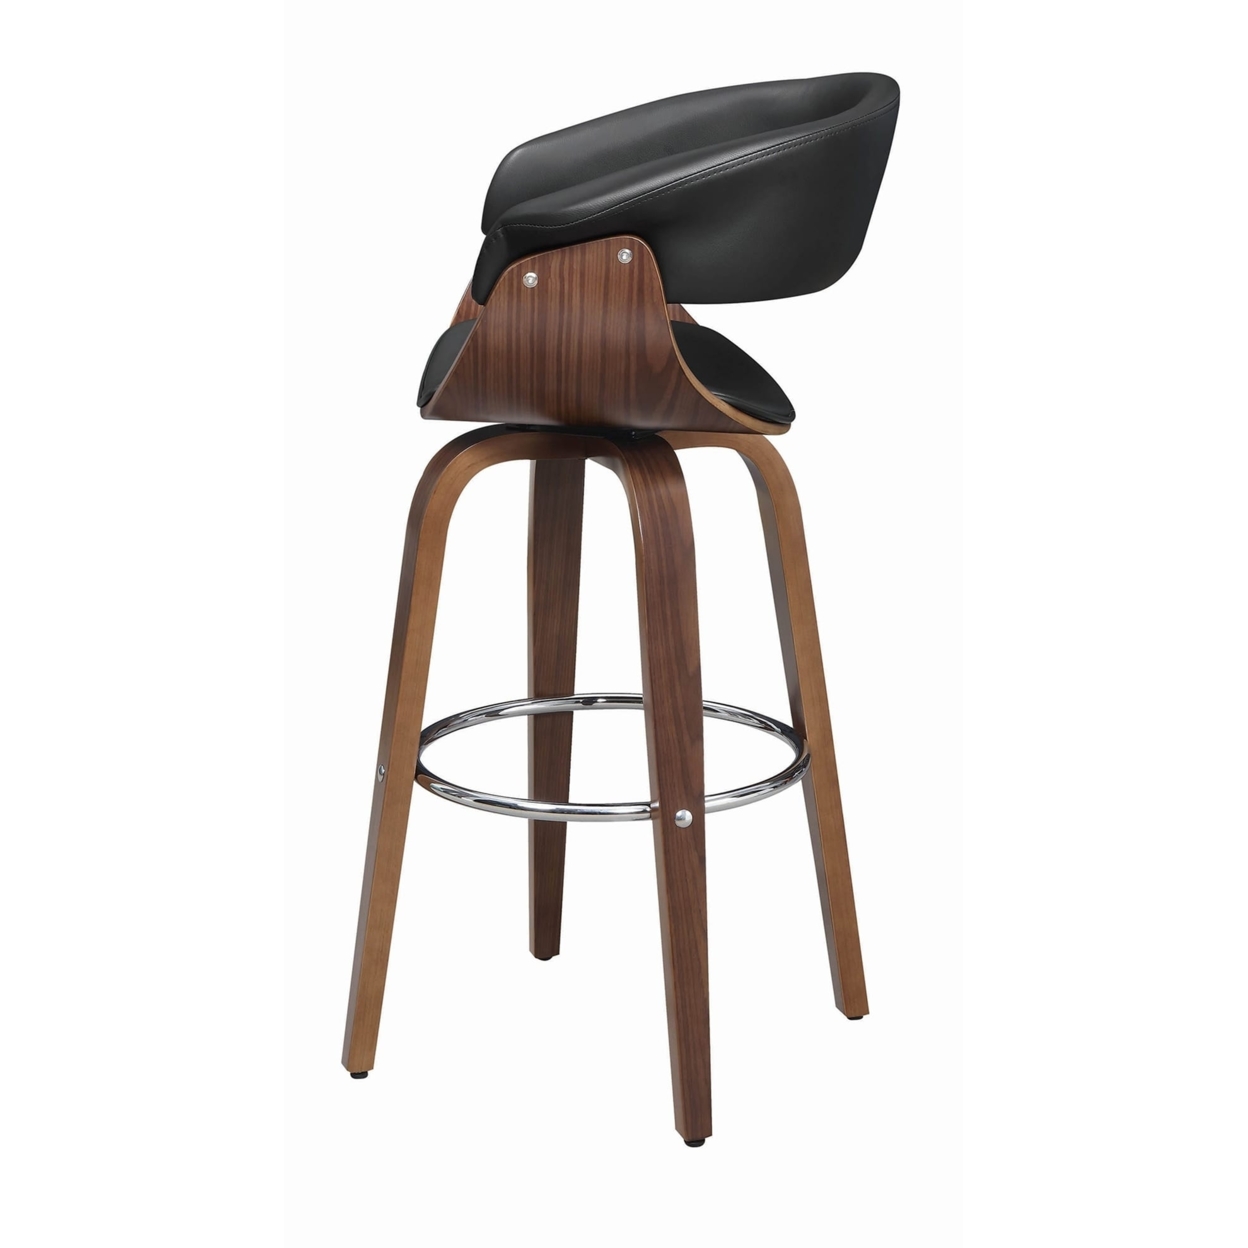 Leatherette Wooden Swivel Bar Stool With Spider Legs, Brown And Black- Saltoro Sherpi